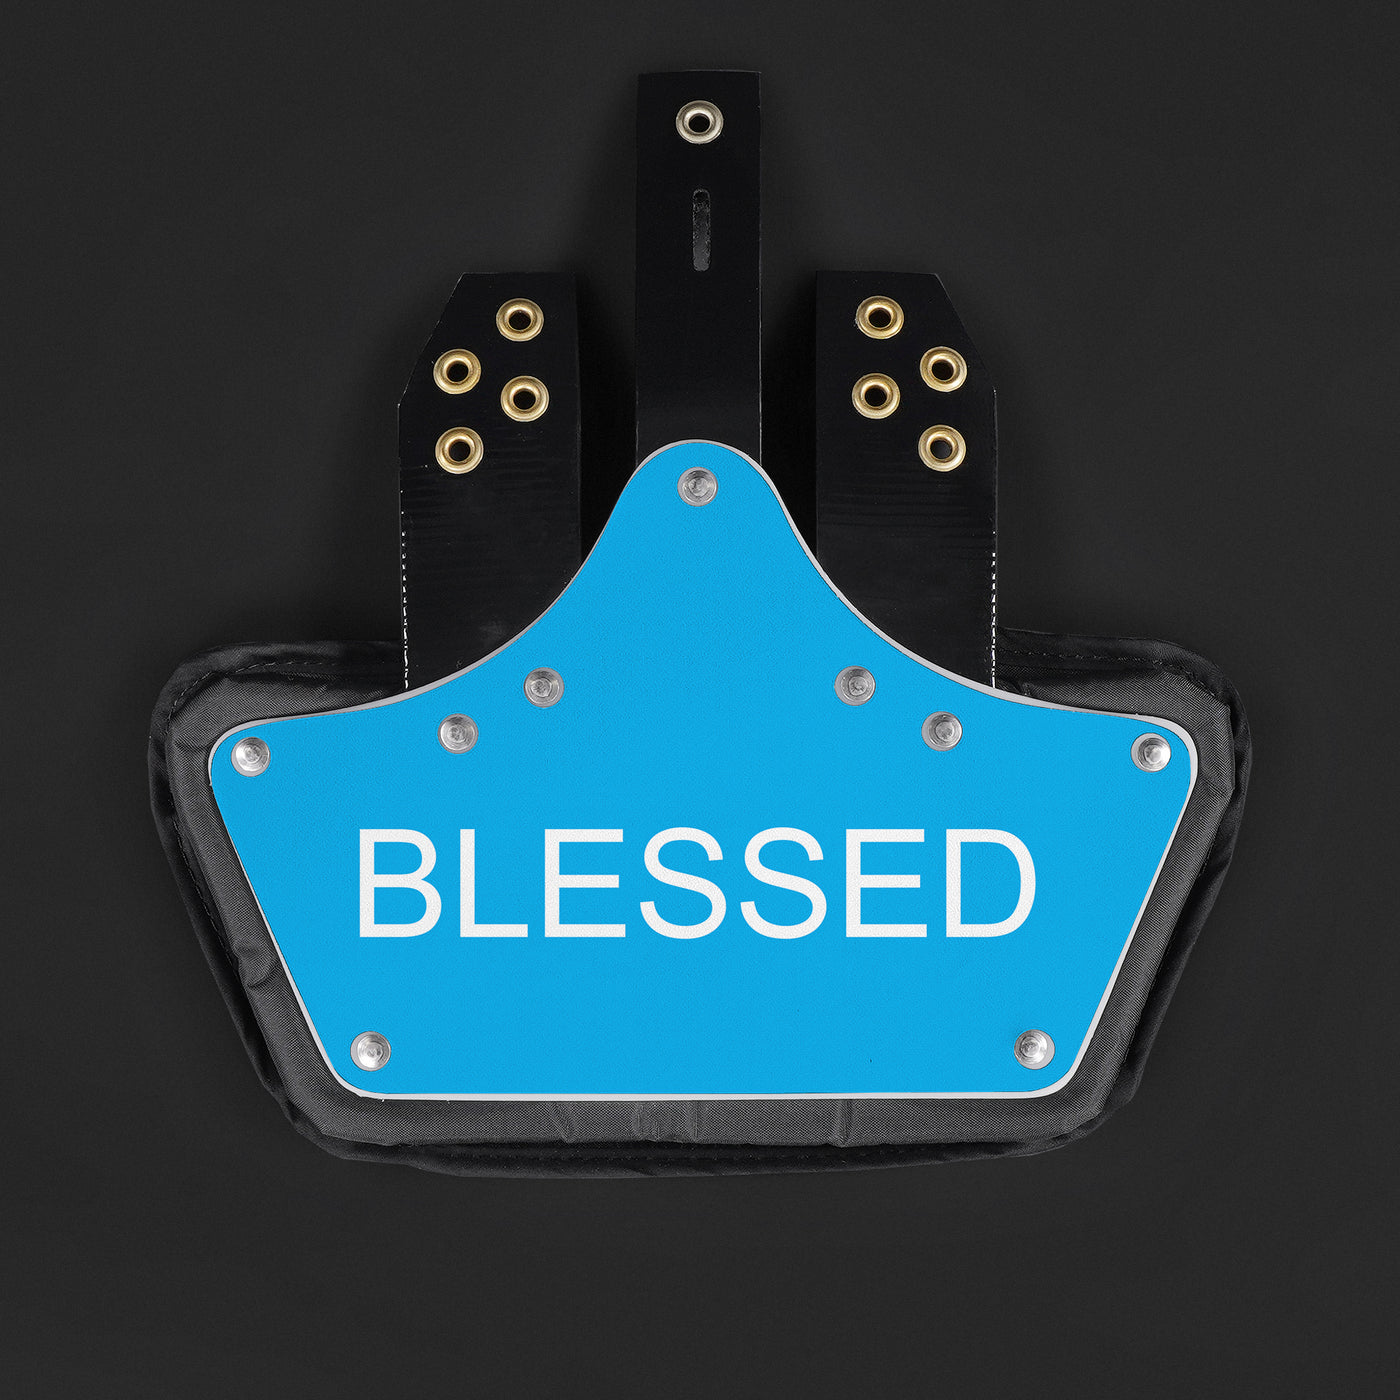 Blessed Blue Sticker for Back Plate